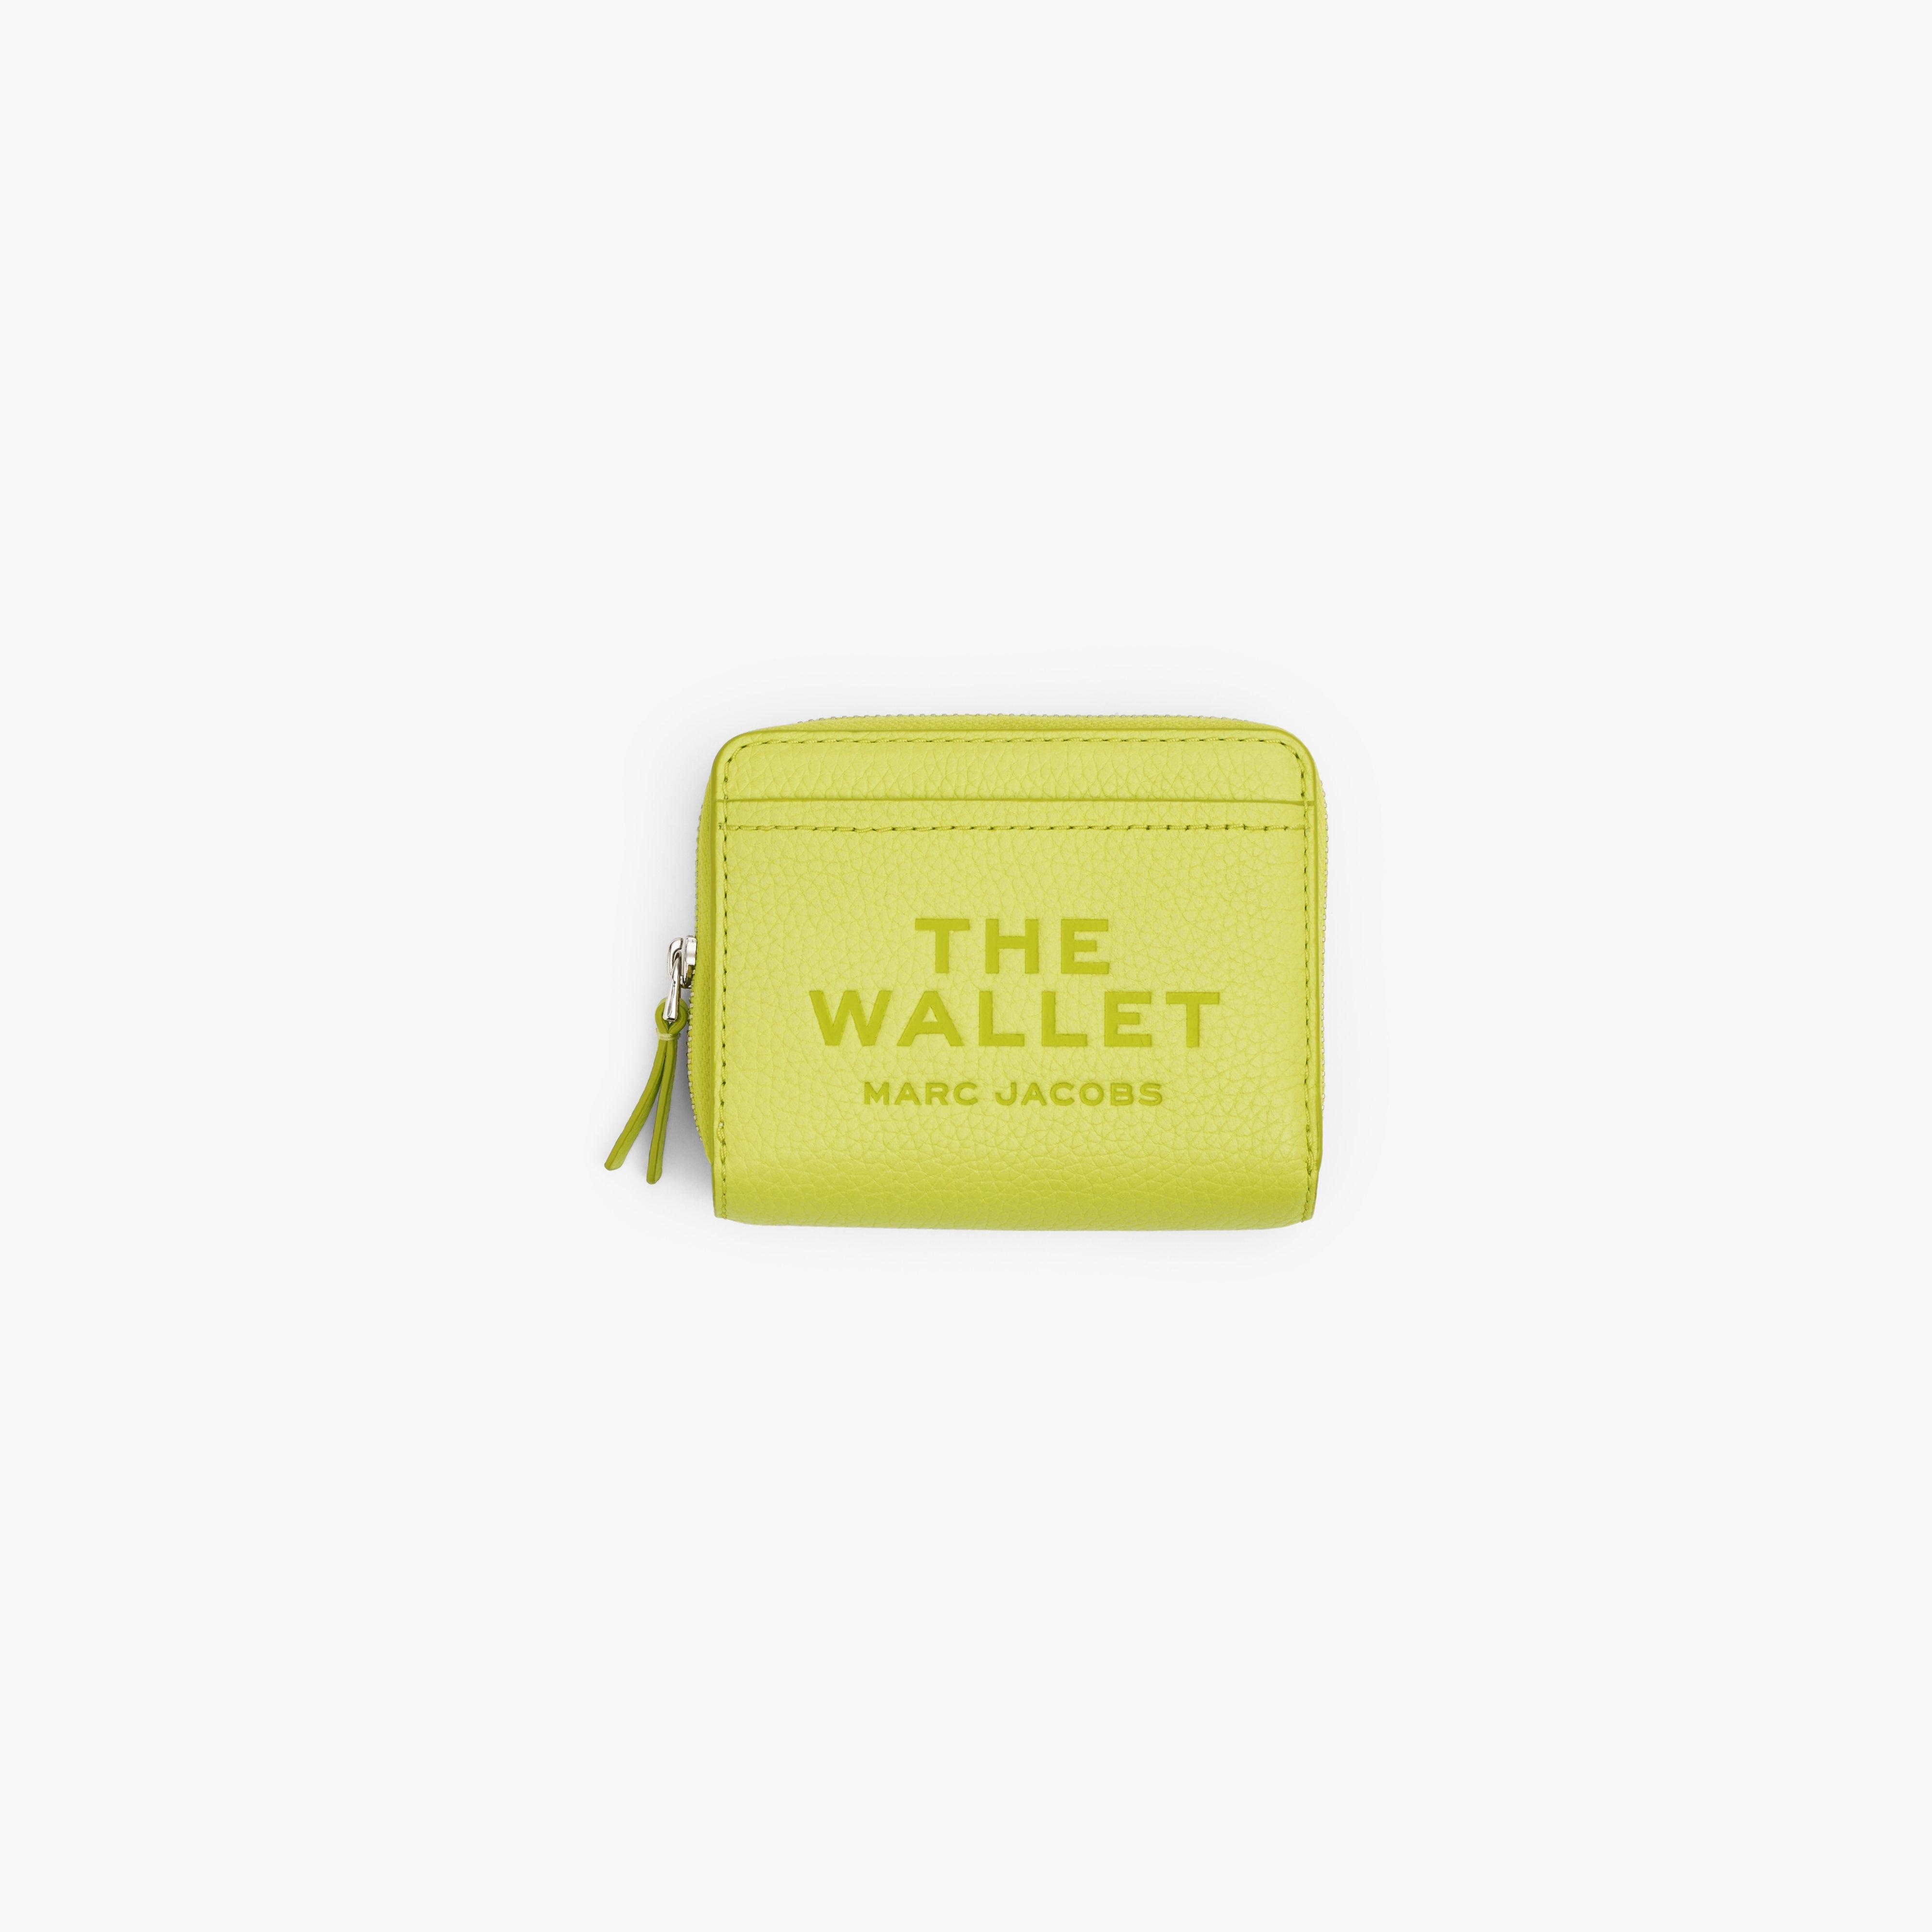 THE LEATHER MINI COMPACT WALLET - 1